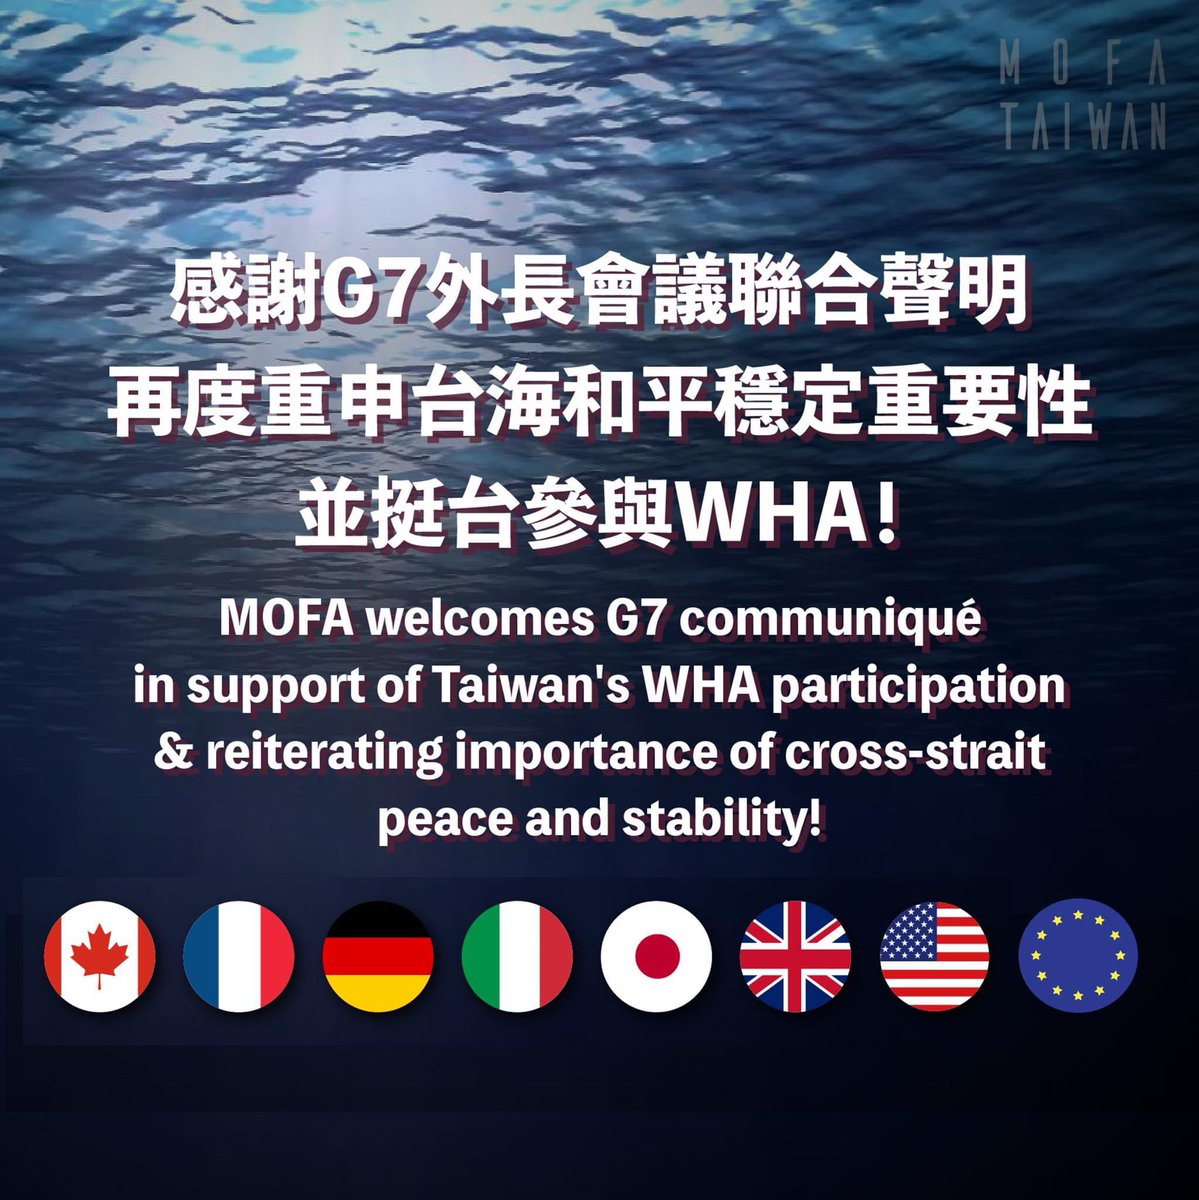 The G7 Foreign Ministers’ Communiqué reiterates the importance of peace and stability across the Taiwan Strait, and calls for Taiwan’s participation in international organizations, including the World Health Assembly and WHO technical meetings. #台灣已是世界的台灣🇹🇼